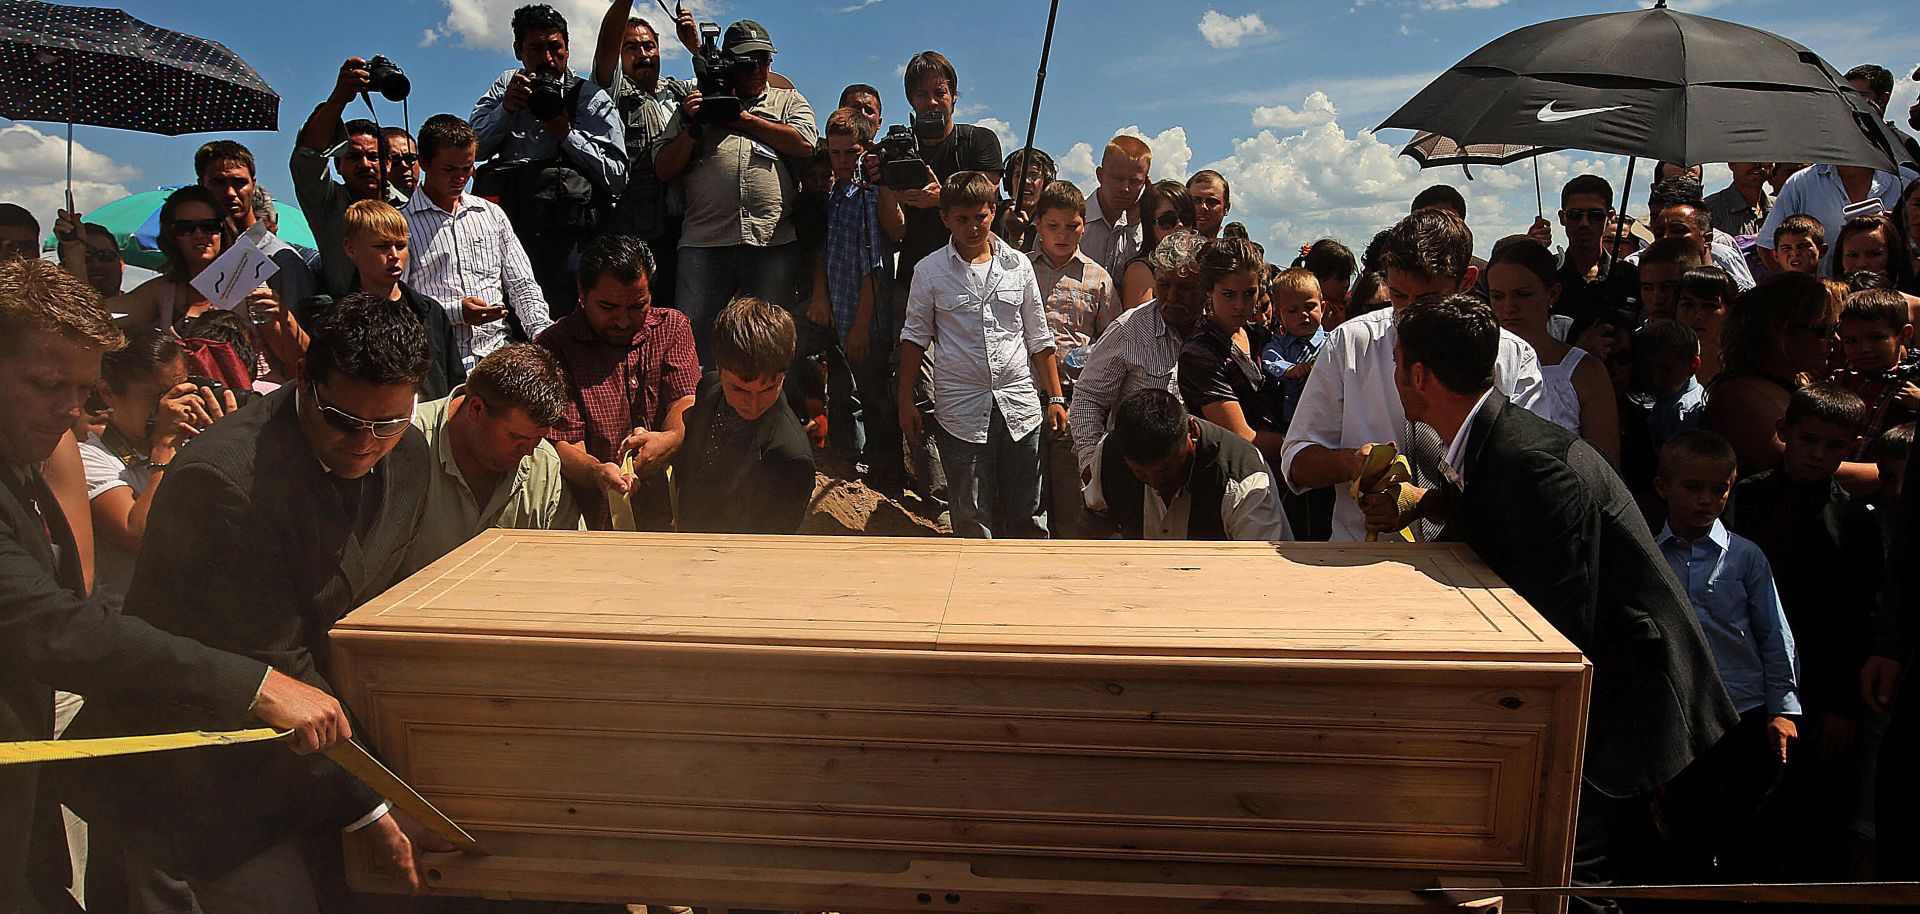 A funeral for Benjamin LeBaron on July 9, 2009, in Chihuahua state, Mexico. LeBaron was a victim of cartel violence.